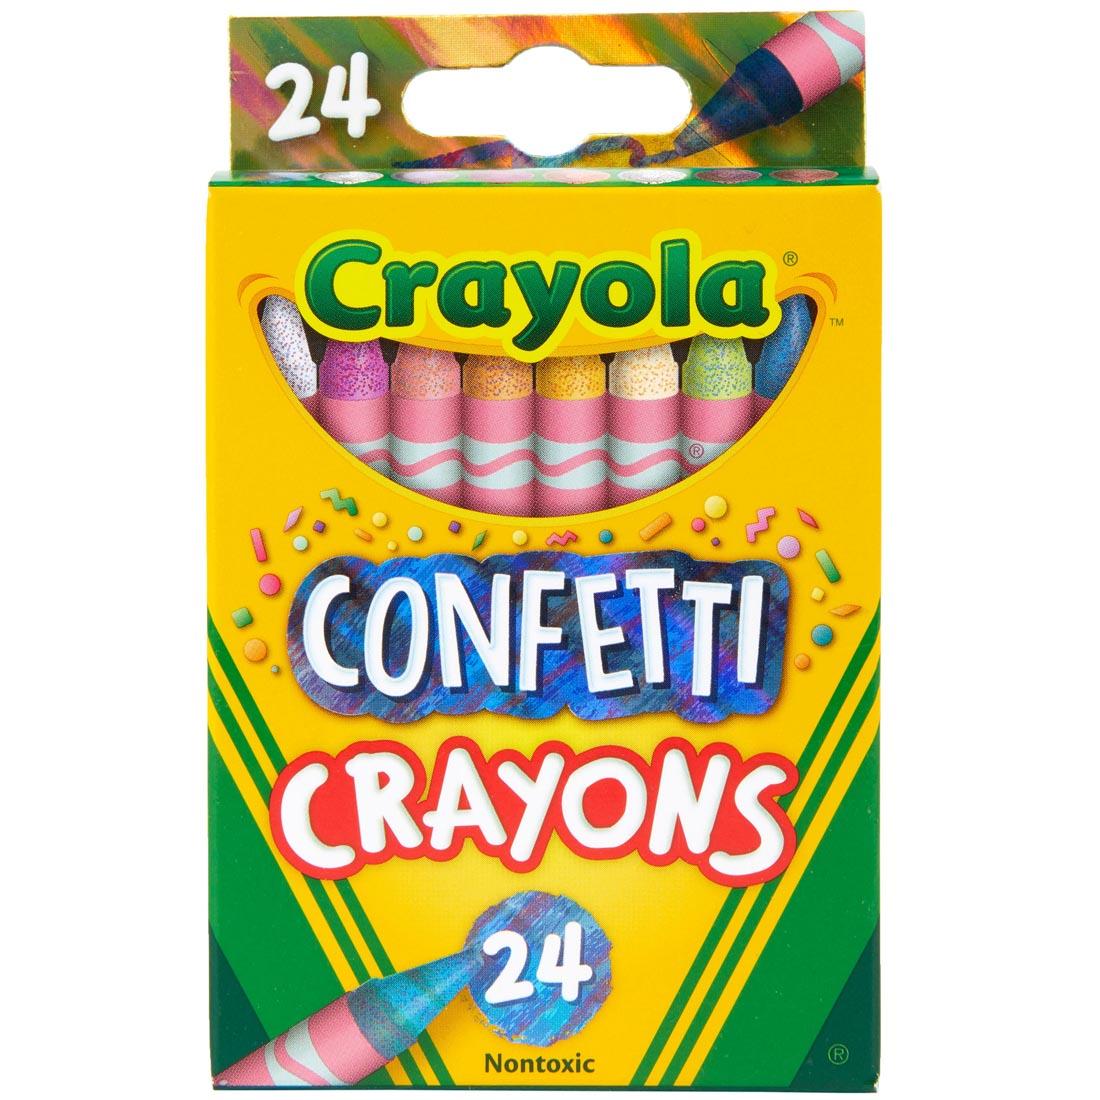 Package of 24 Crayola Confetti Crayons